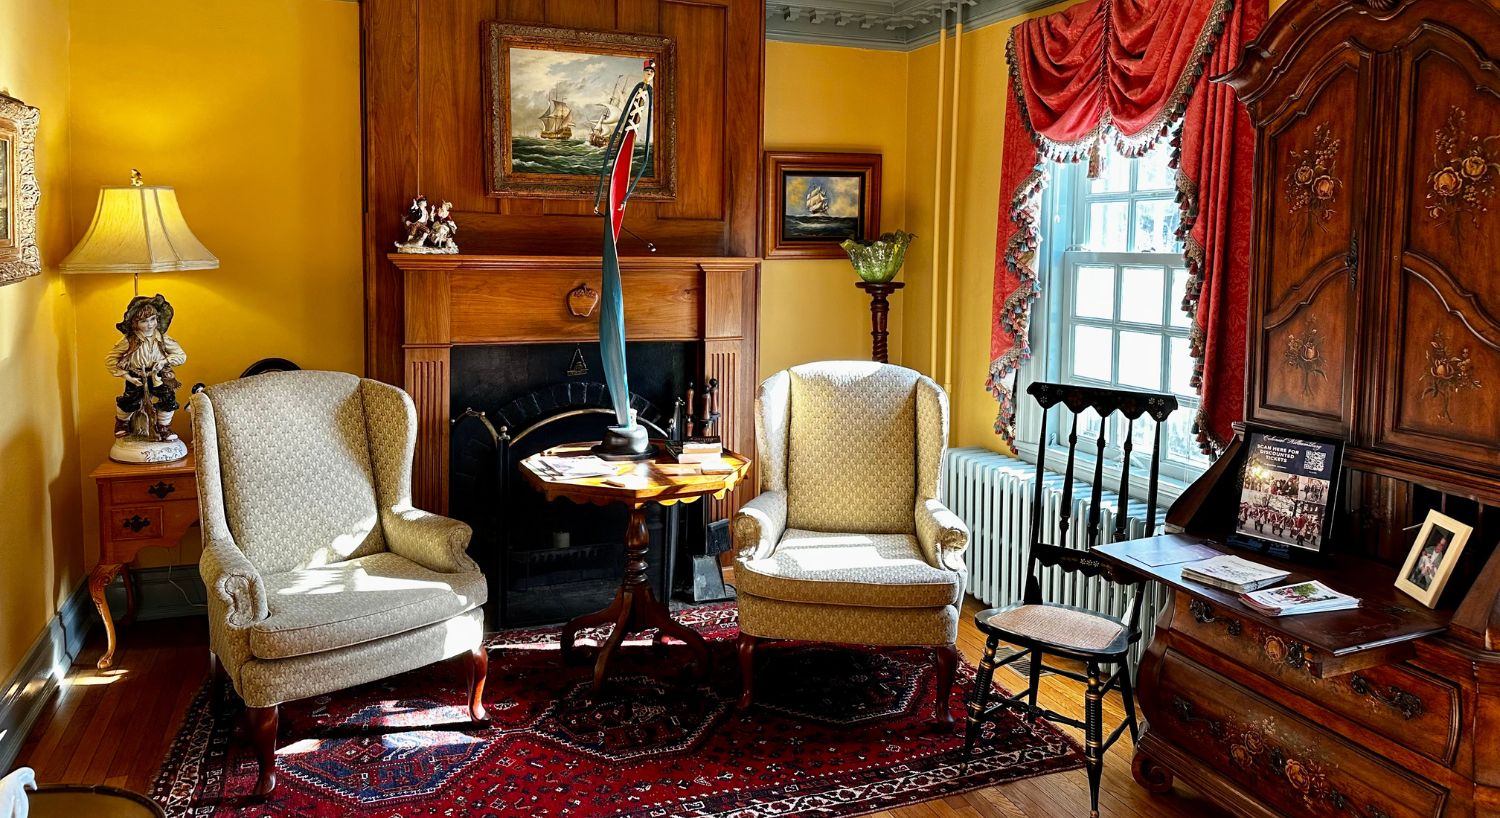 Gorgeous sitting room with two wingback chairs and table in front of a fireplace, yellow walls, window with a red valence draped at the top and large antique hutch